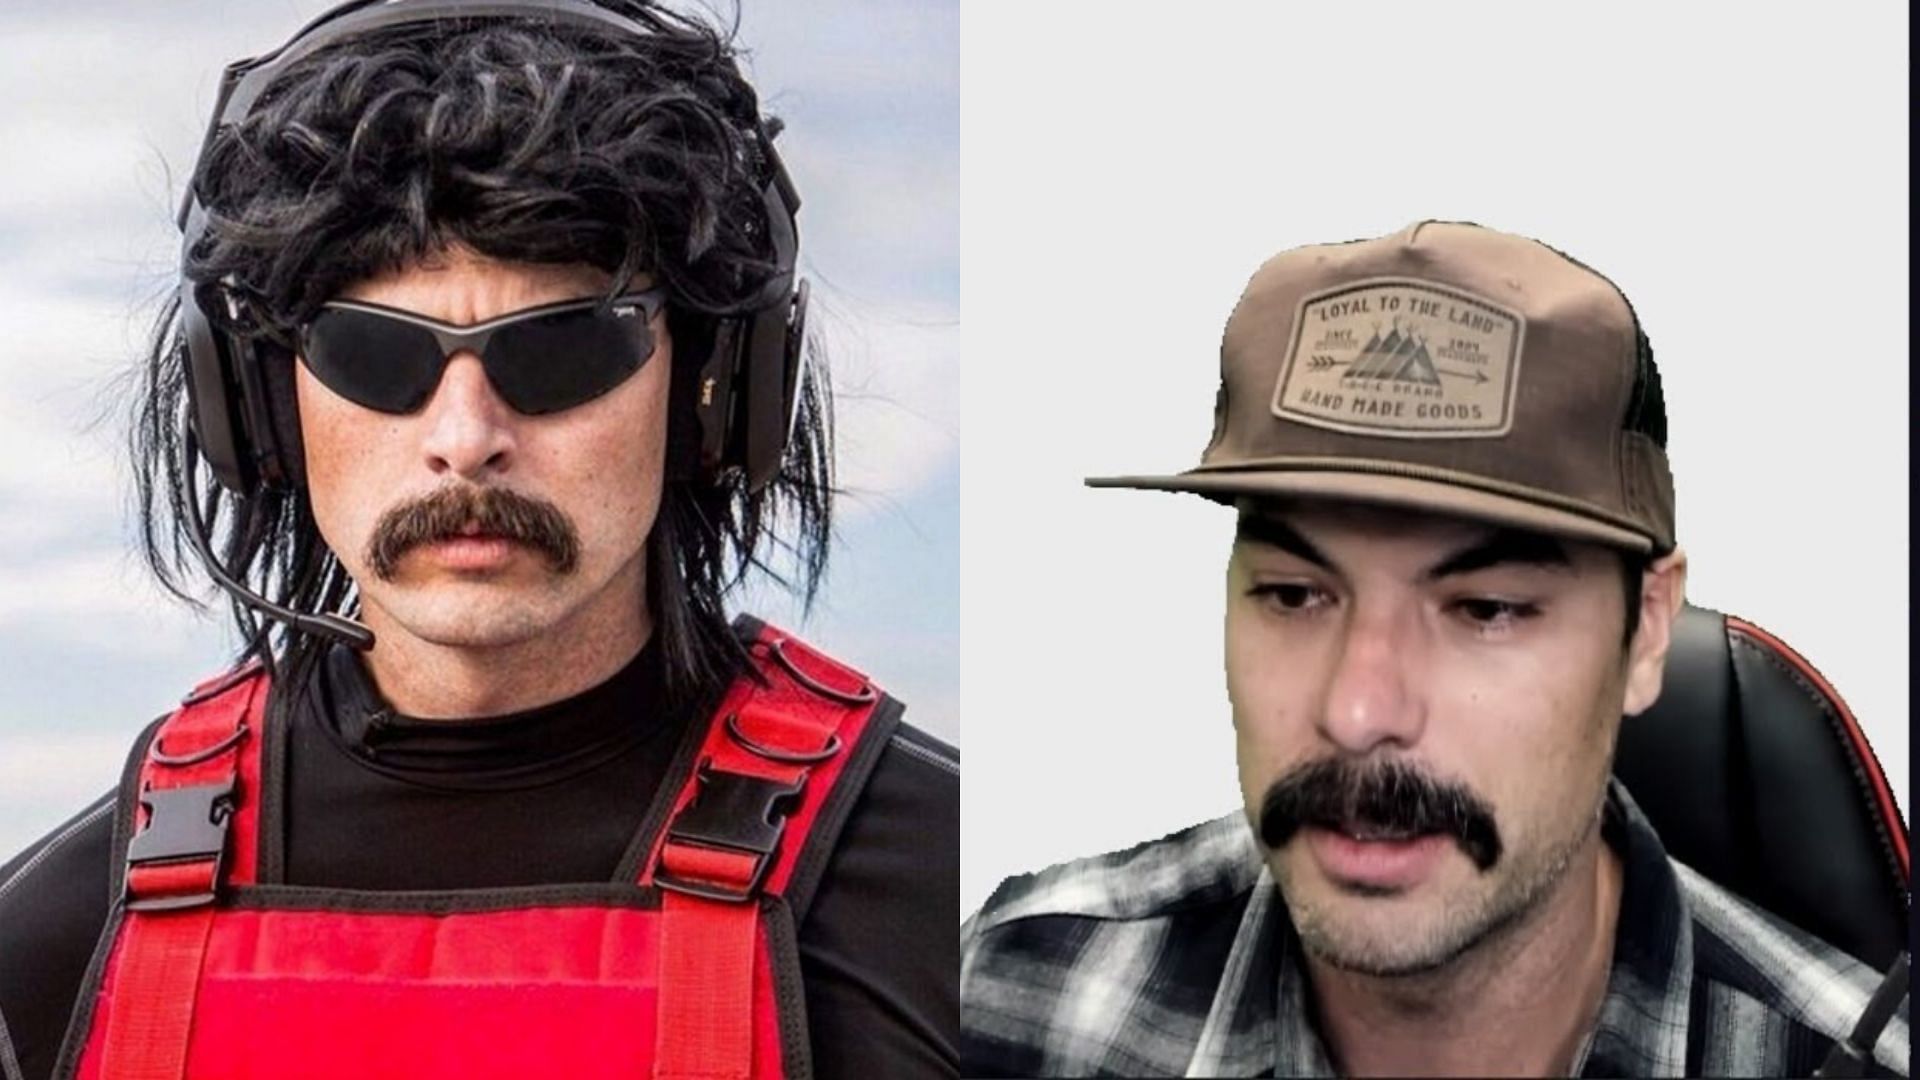 who did drdisrespect cheat with